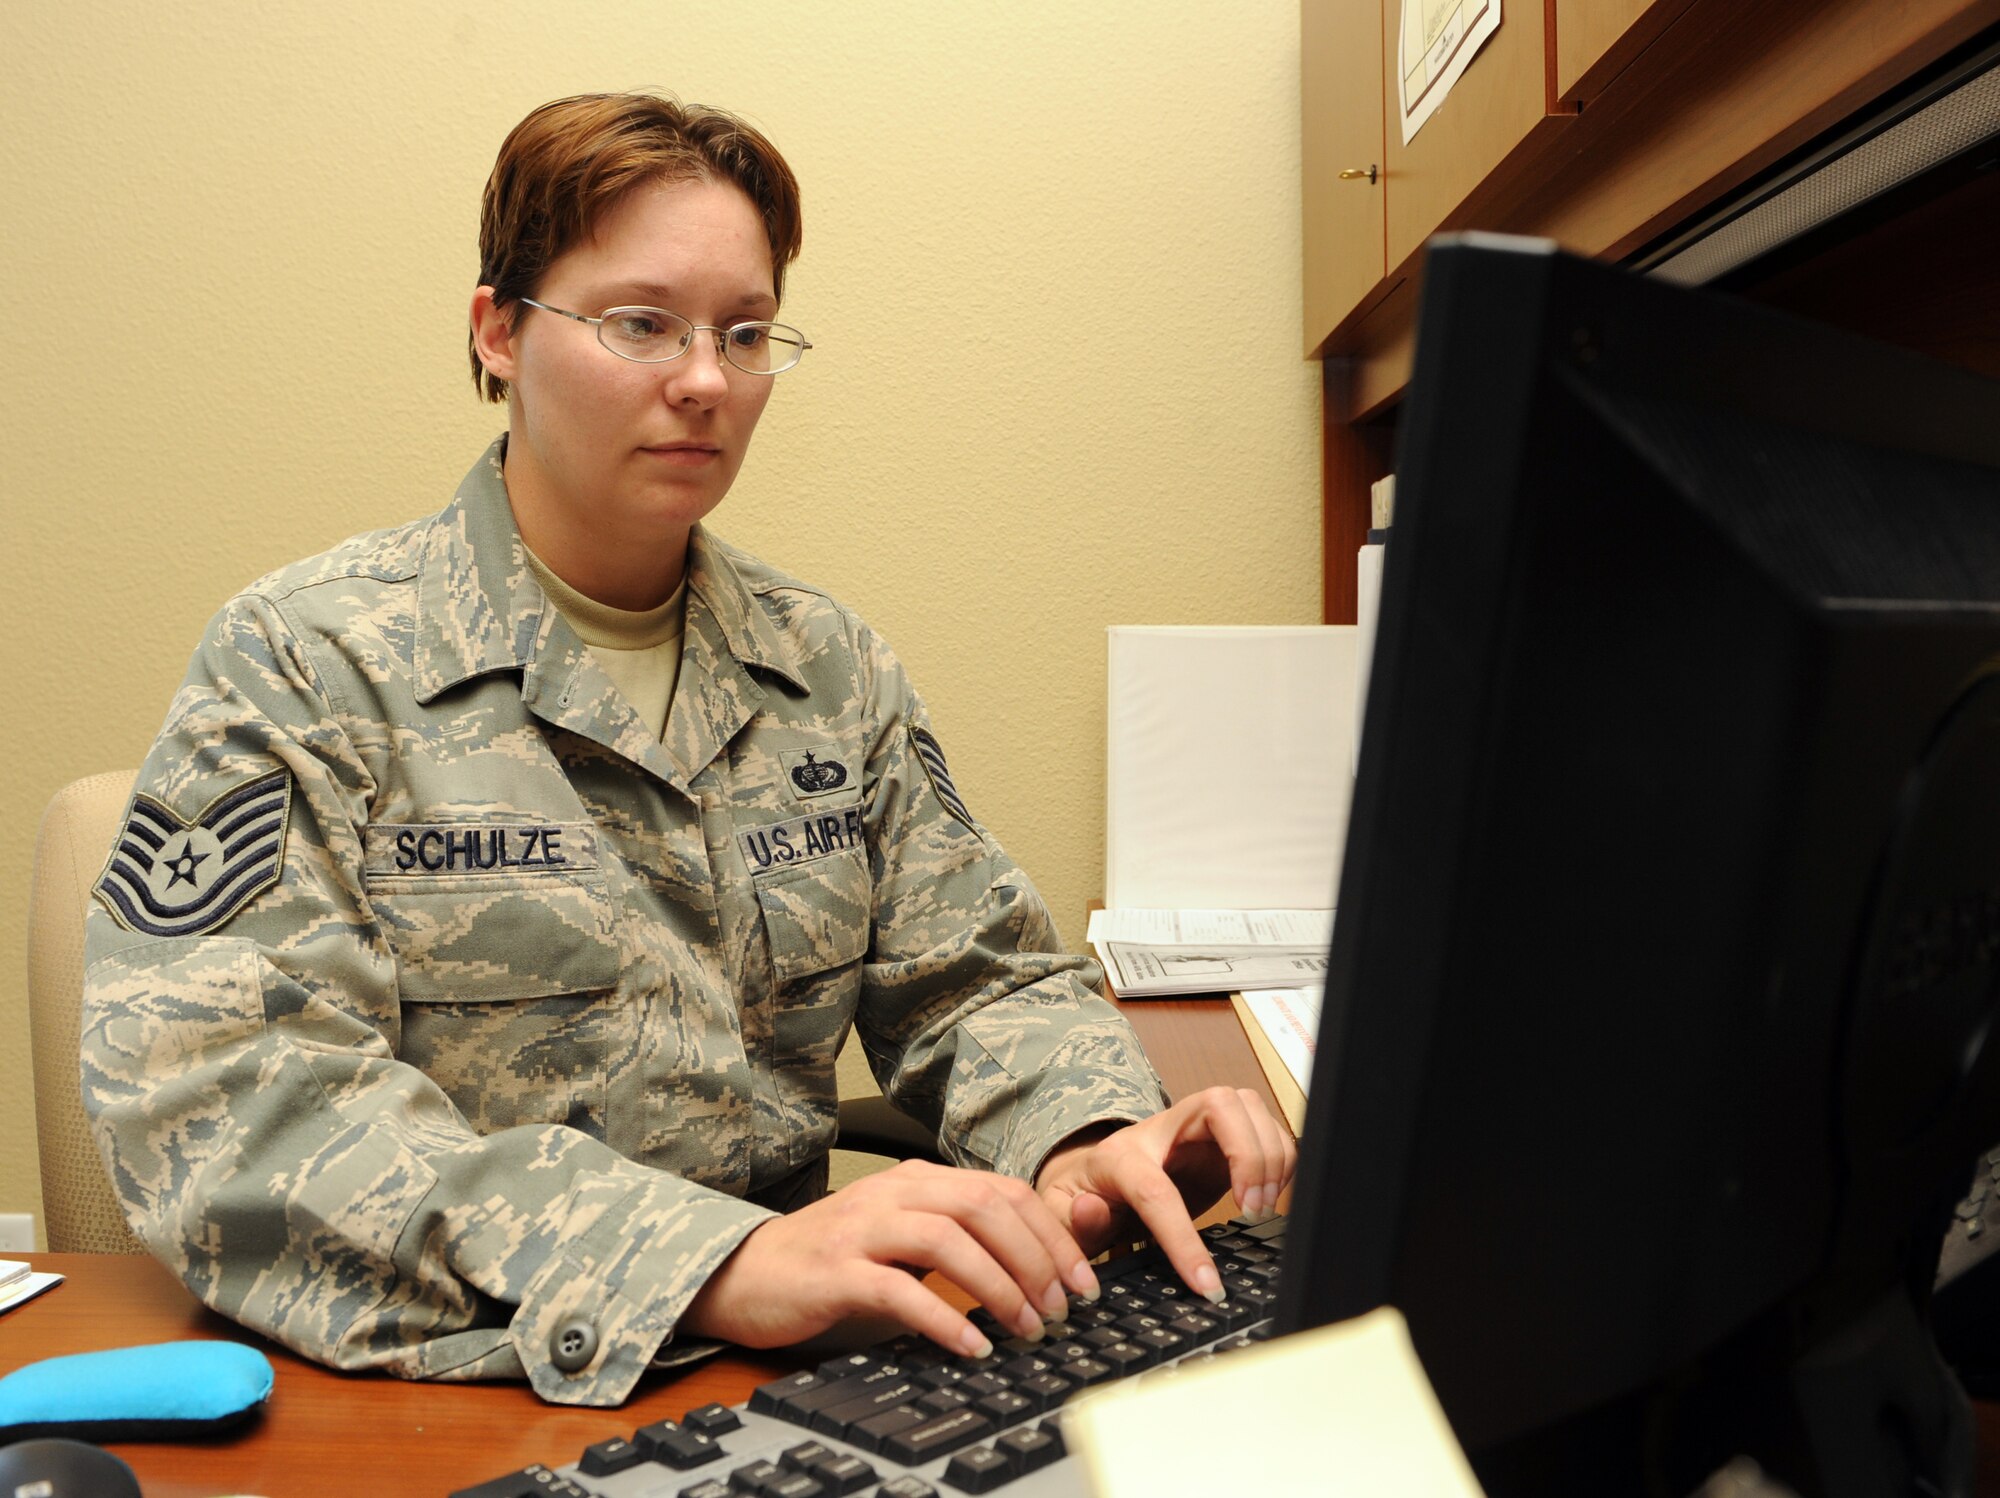 MOUNTAIN HOME AIR FORCE BASE, Idaho - Tech. Sgt. Linda Schulze serves as the 366th Force Support Squadron lodging noncommissioned officer in charge. (U.S. Air Force photo by Airman 1st Class Deborah Lockhart)